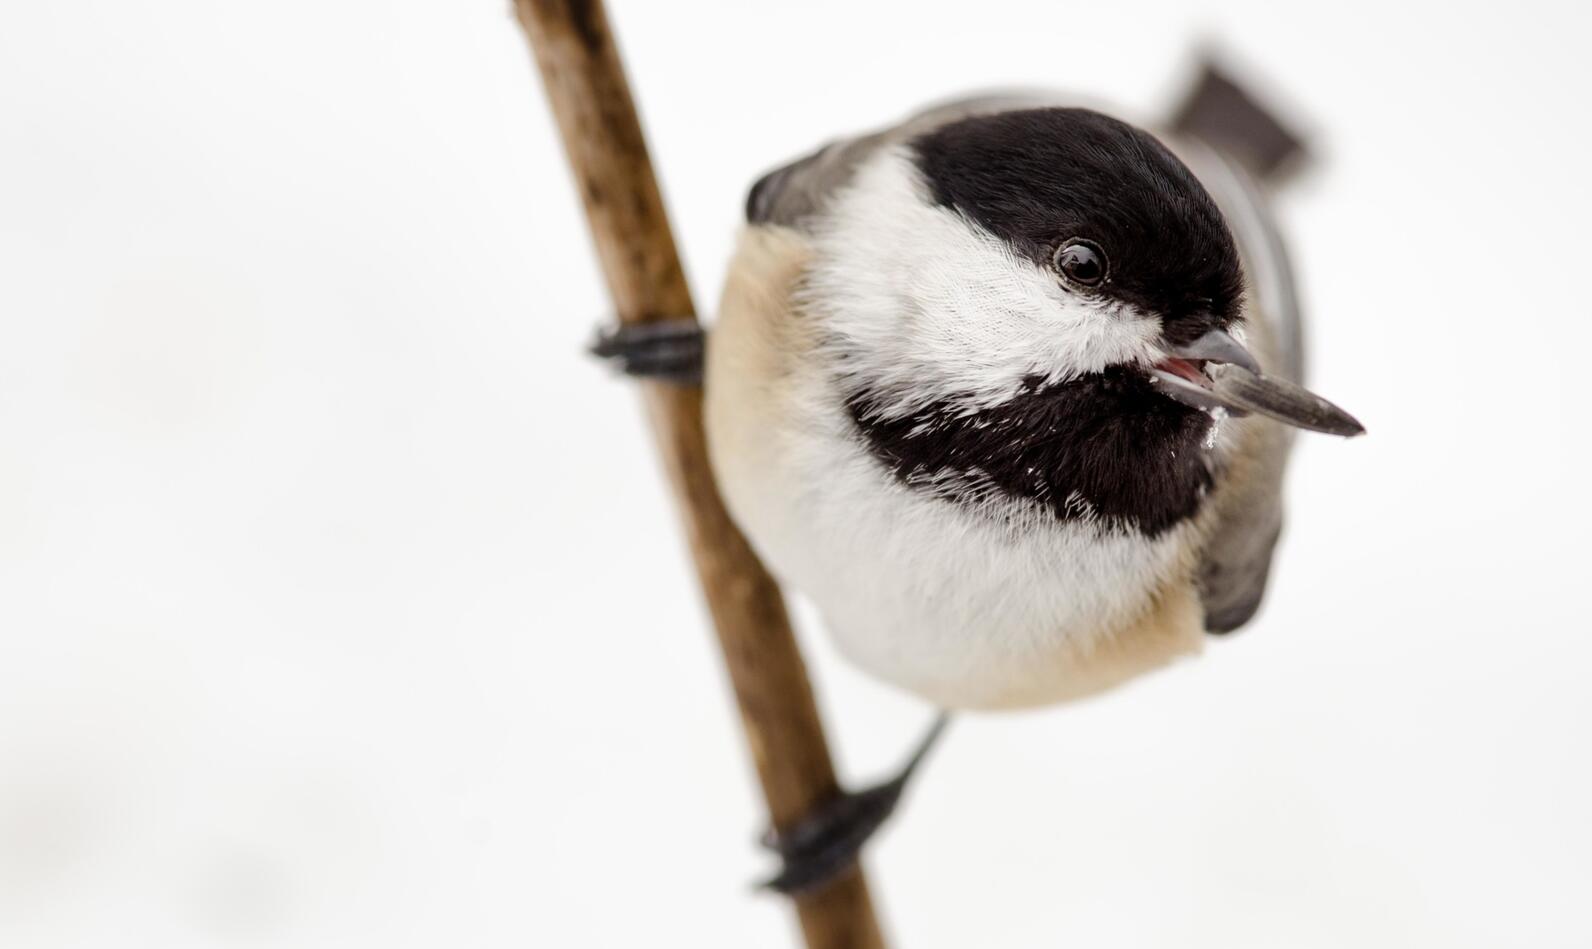 A close-up of a Black-capped Chickadee with a sunflower seed in its beak.